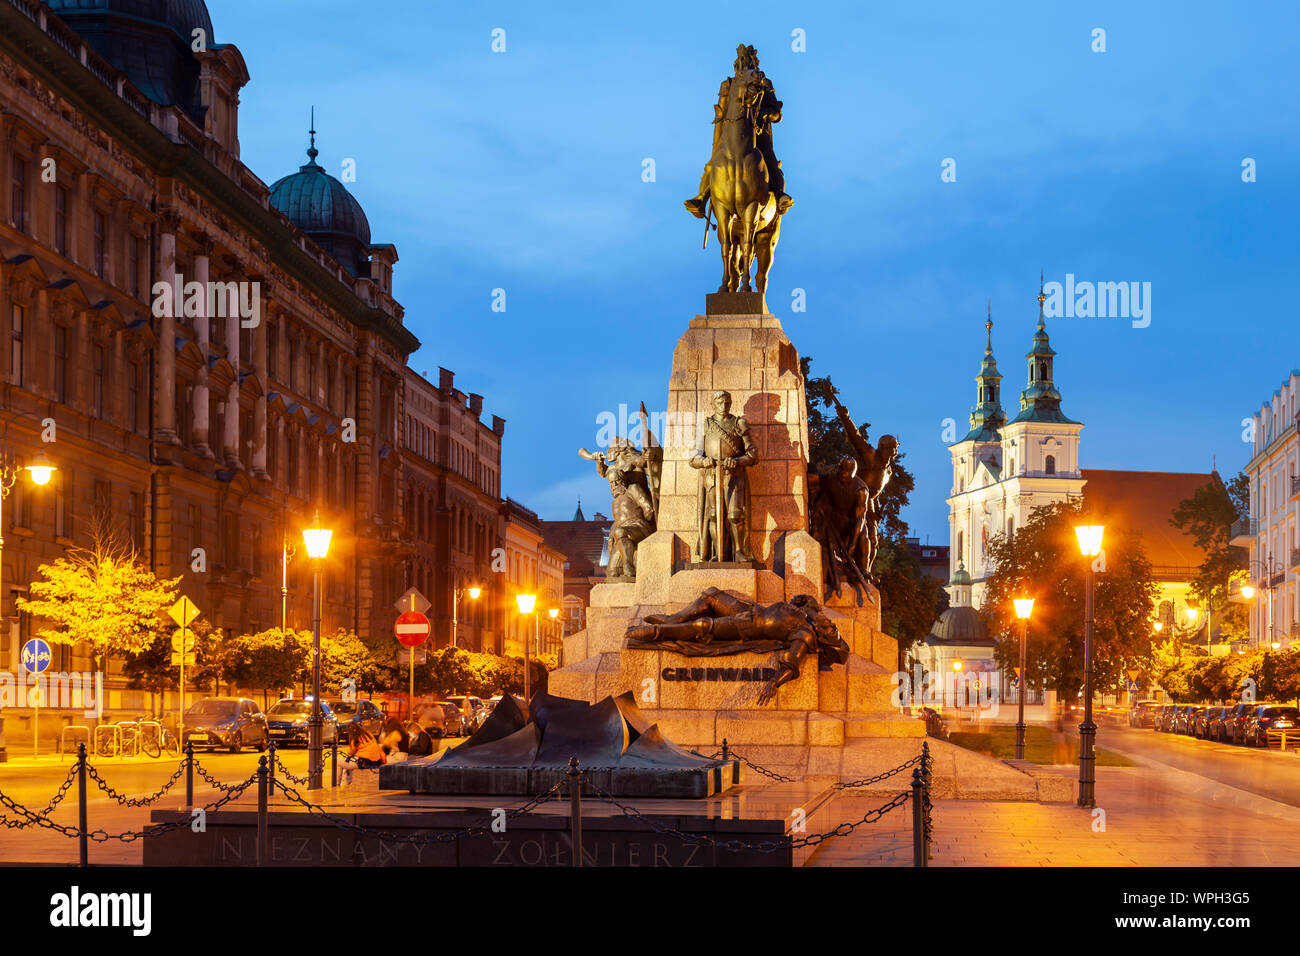 Evening at the Grunwald Monument in Krakow, Poland. Stock Photo